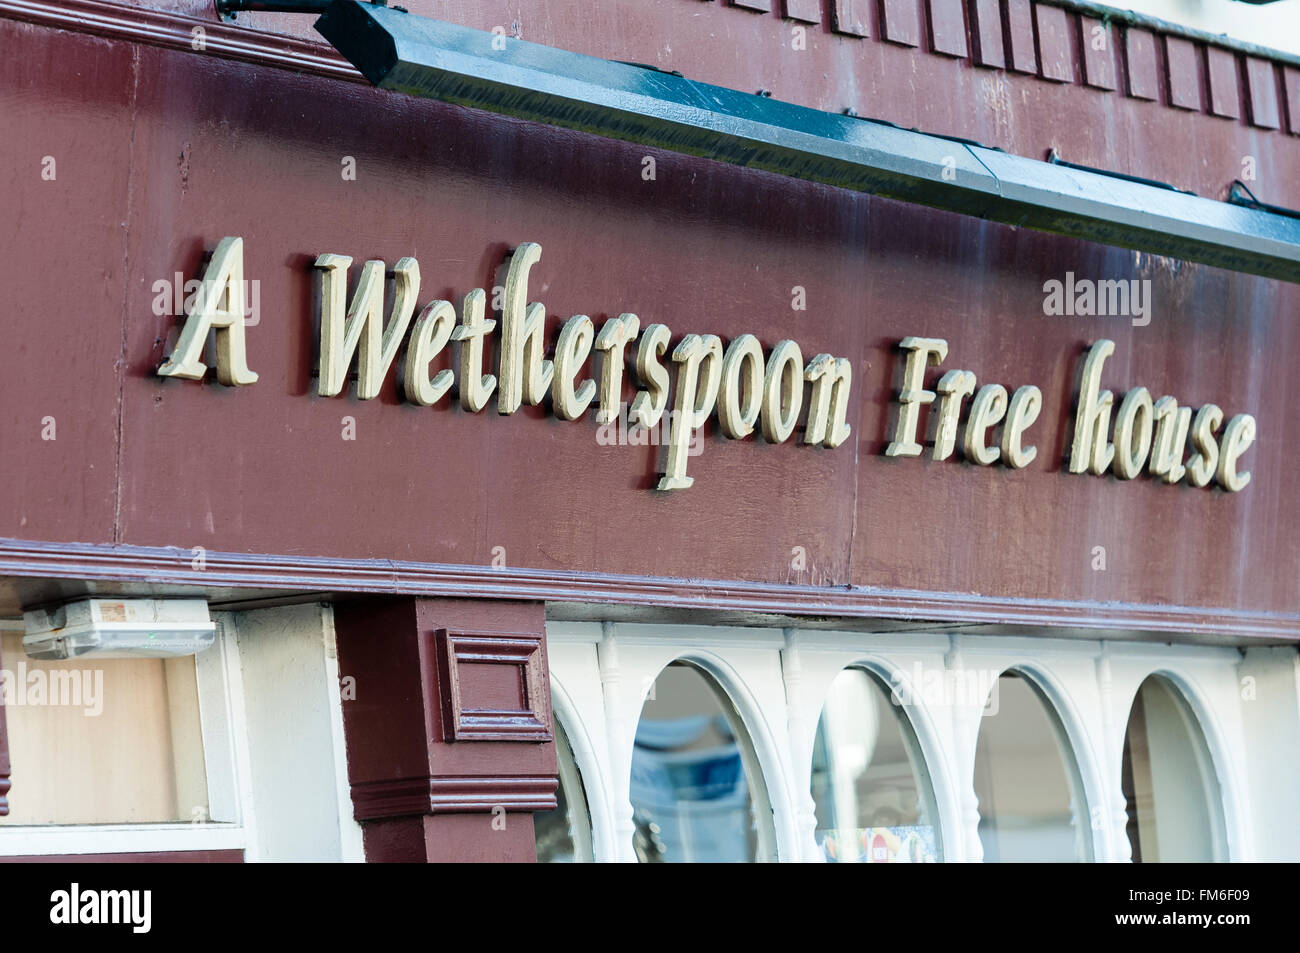 Sign at a Wetherspoon Free House (indicating they are not confined to a single brewery or distributor). Stock Photo